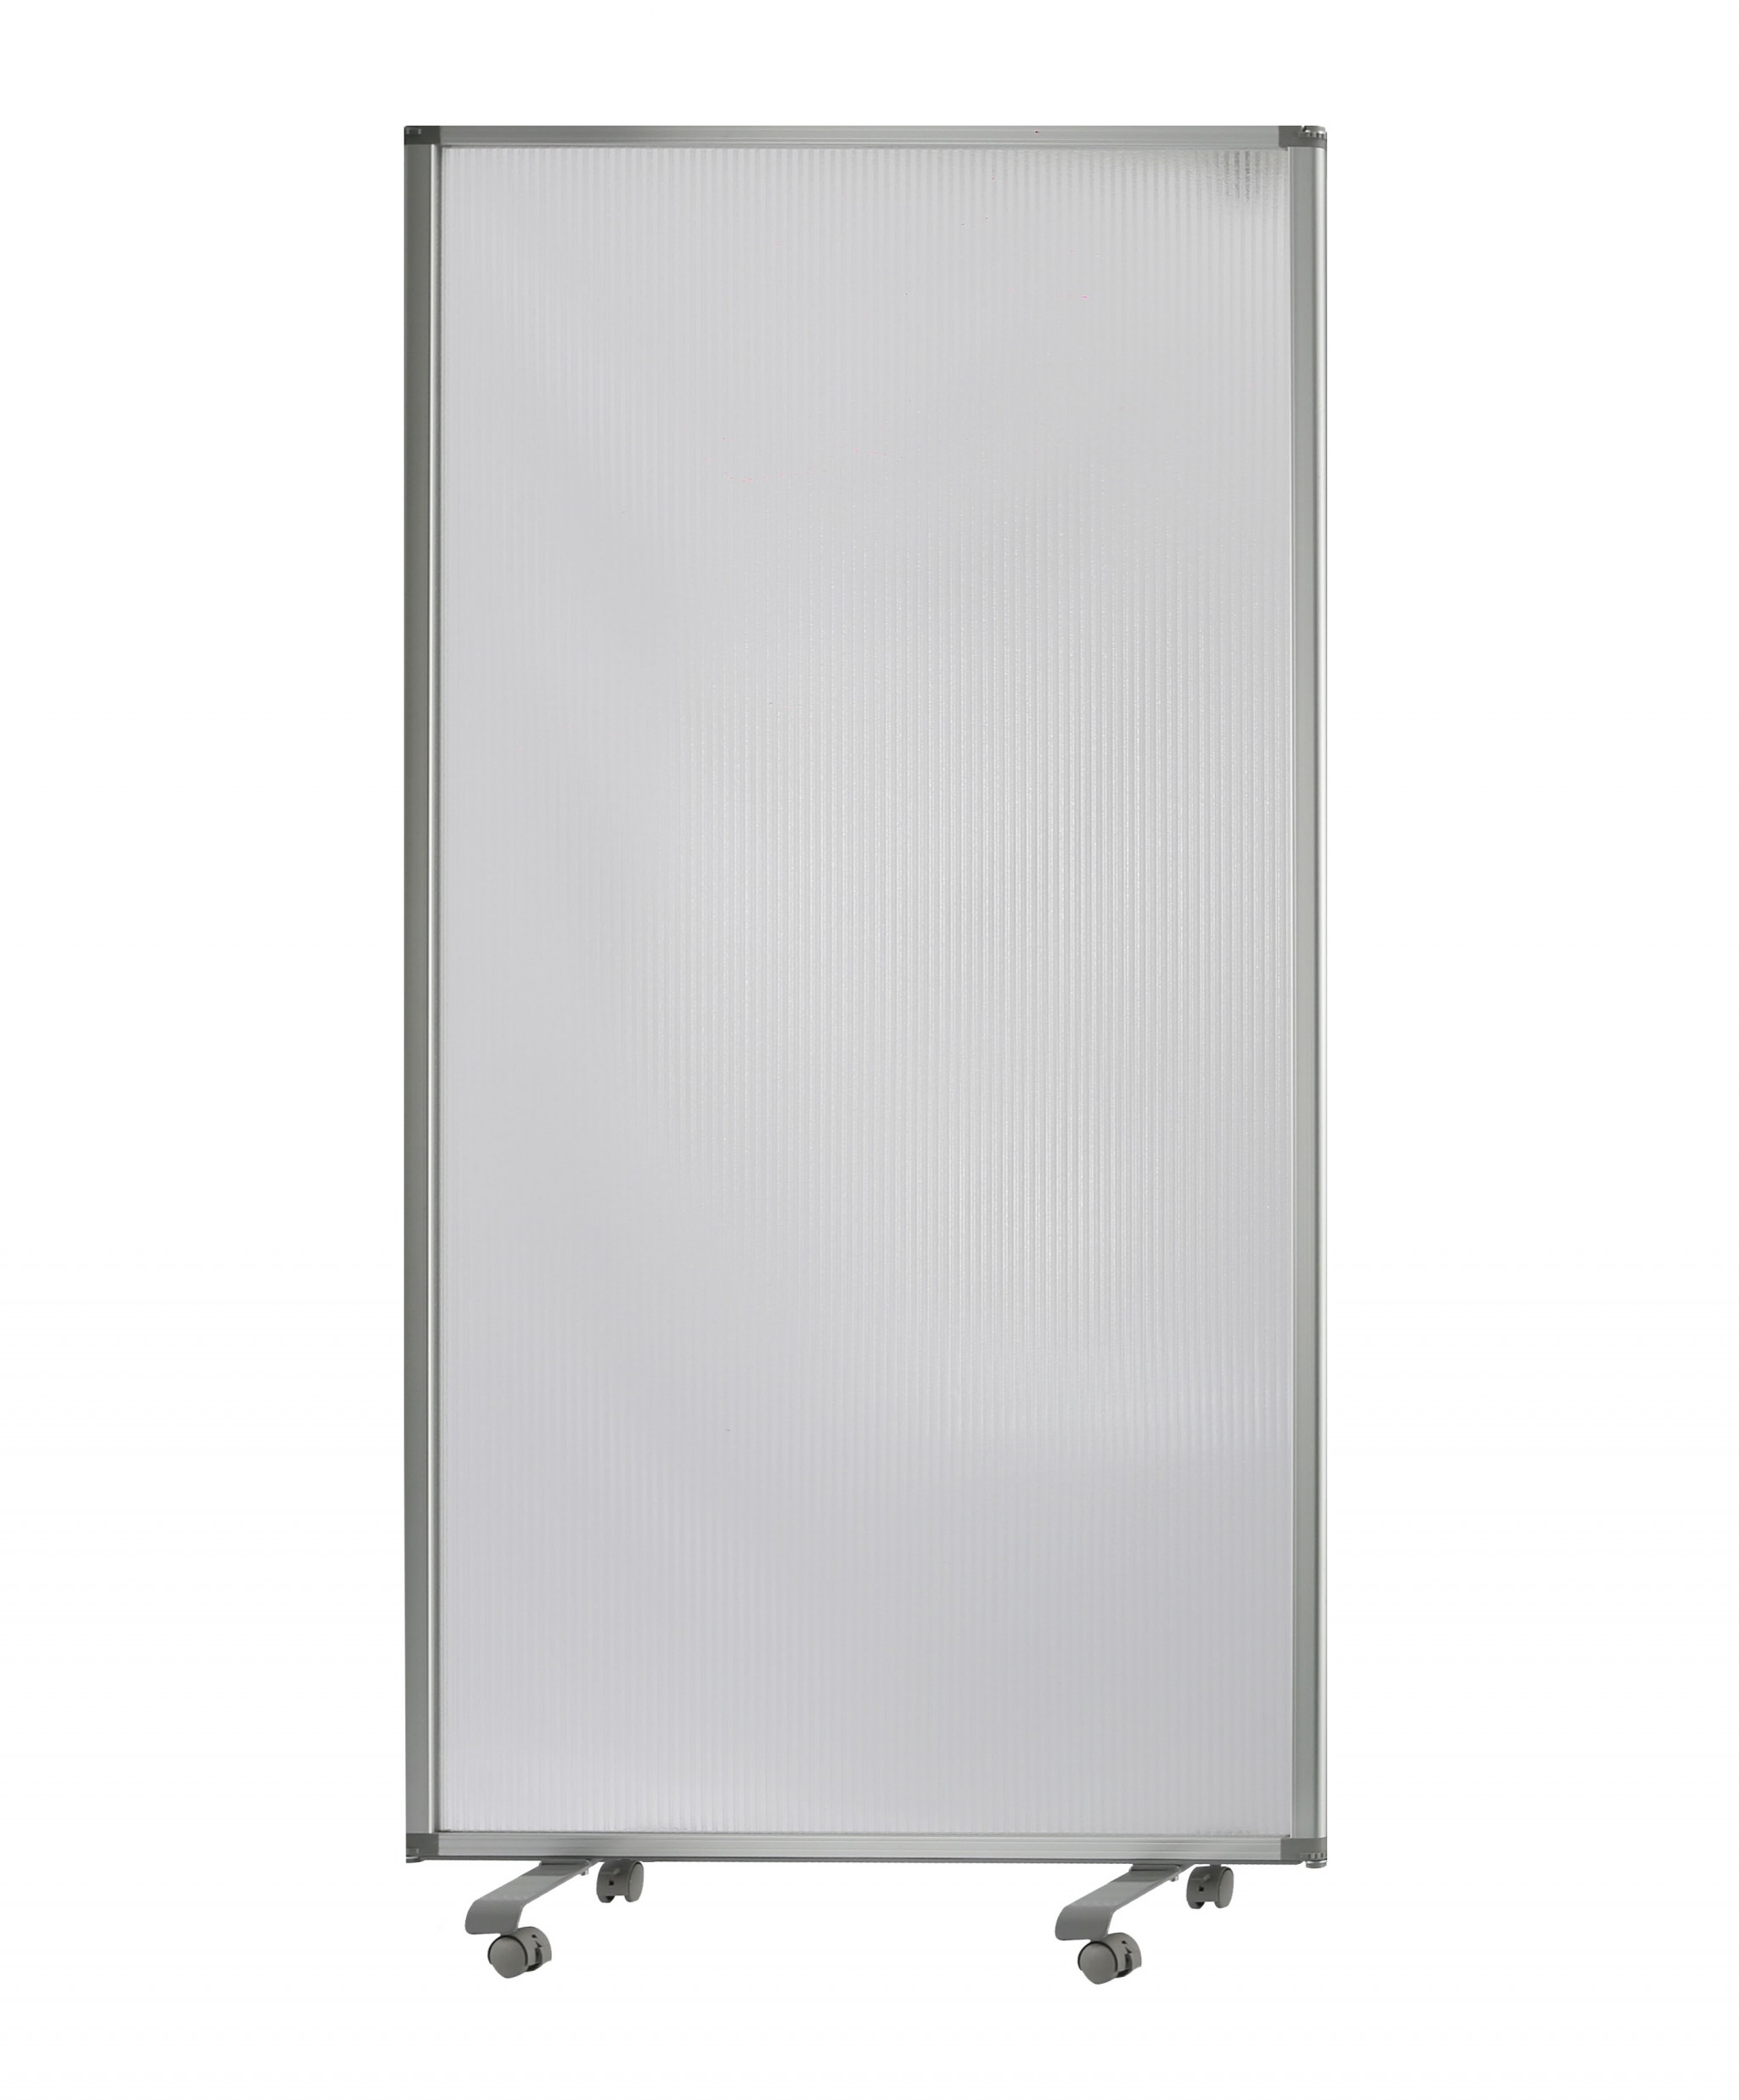 106" x 1" x 71" White, Metal and PVC Resilient - Screen